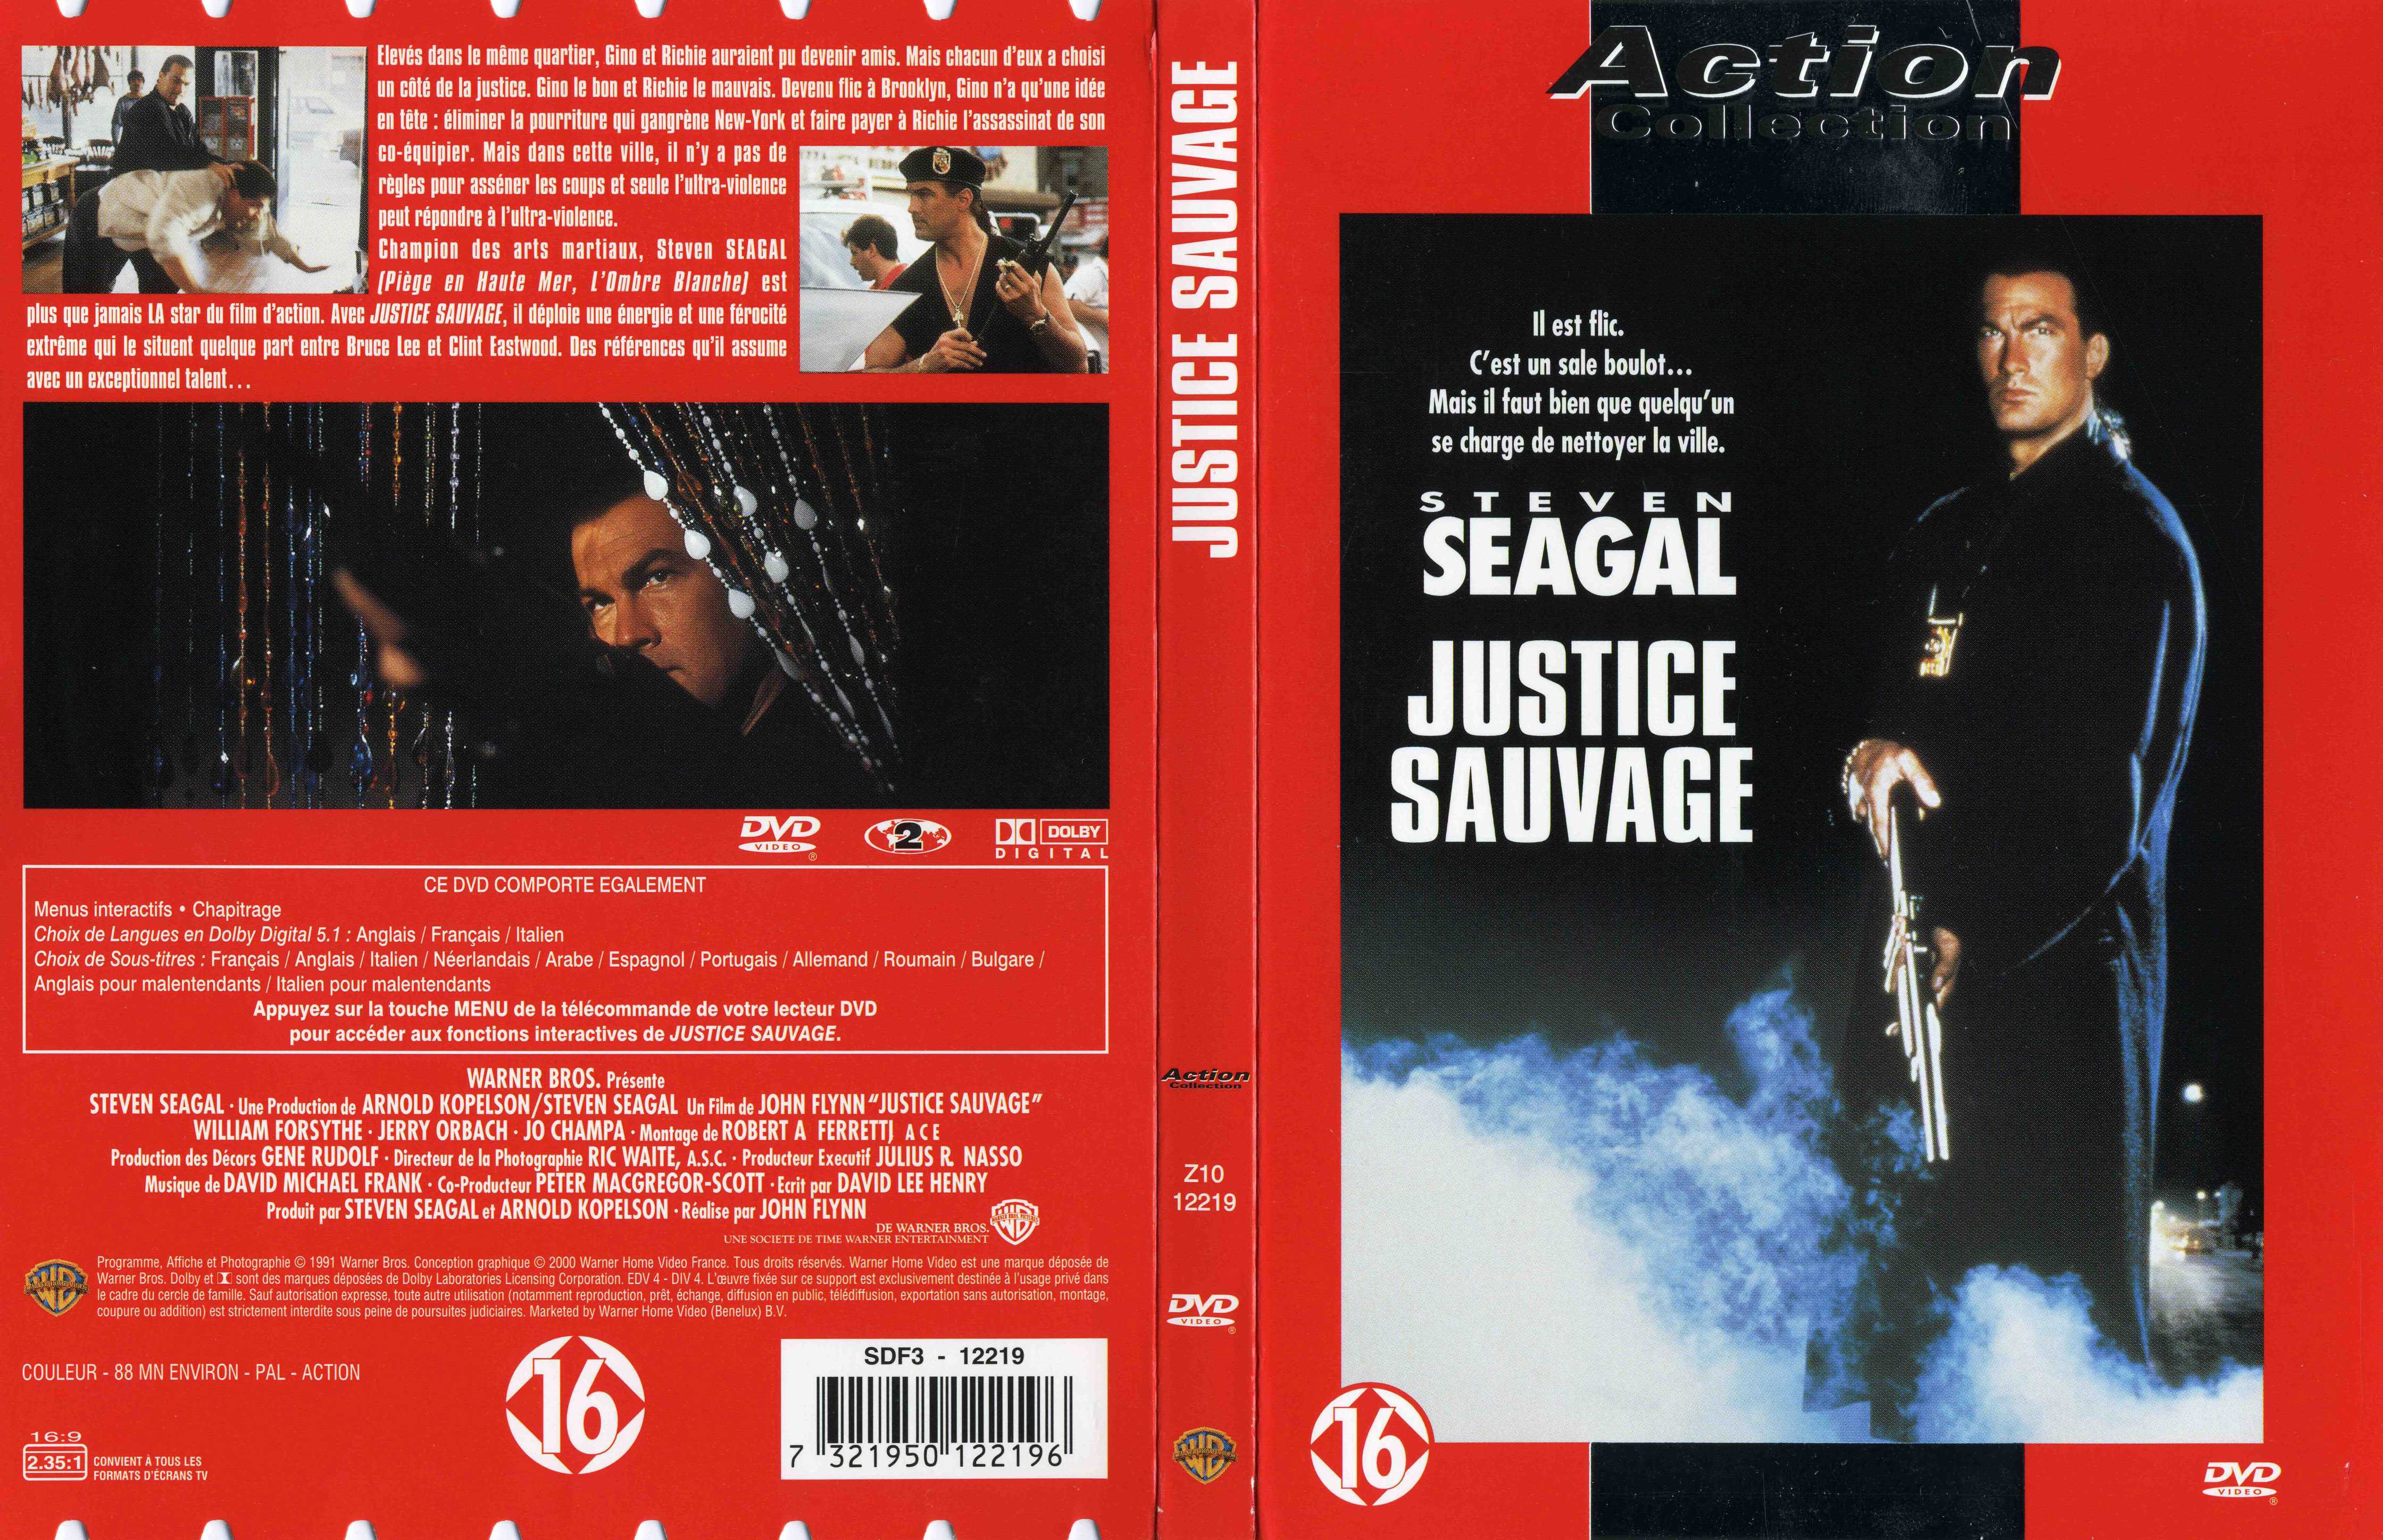 Jaquette DVD Justice sauvage v2